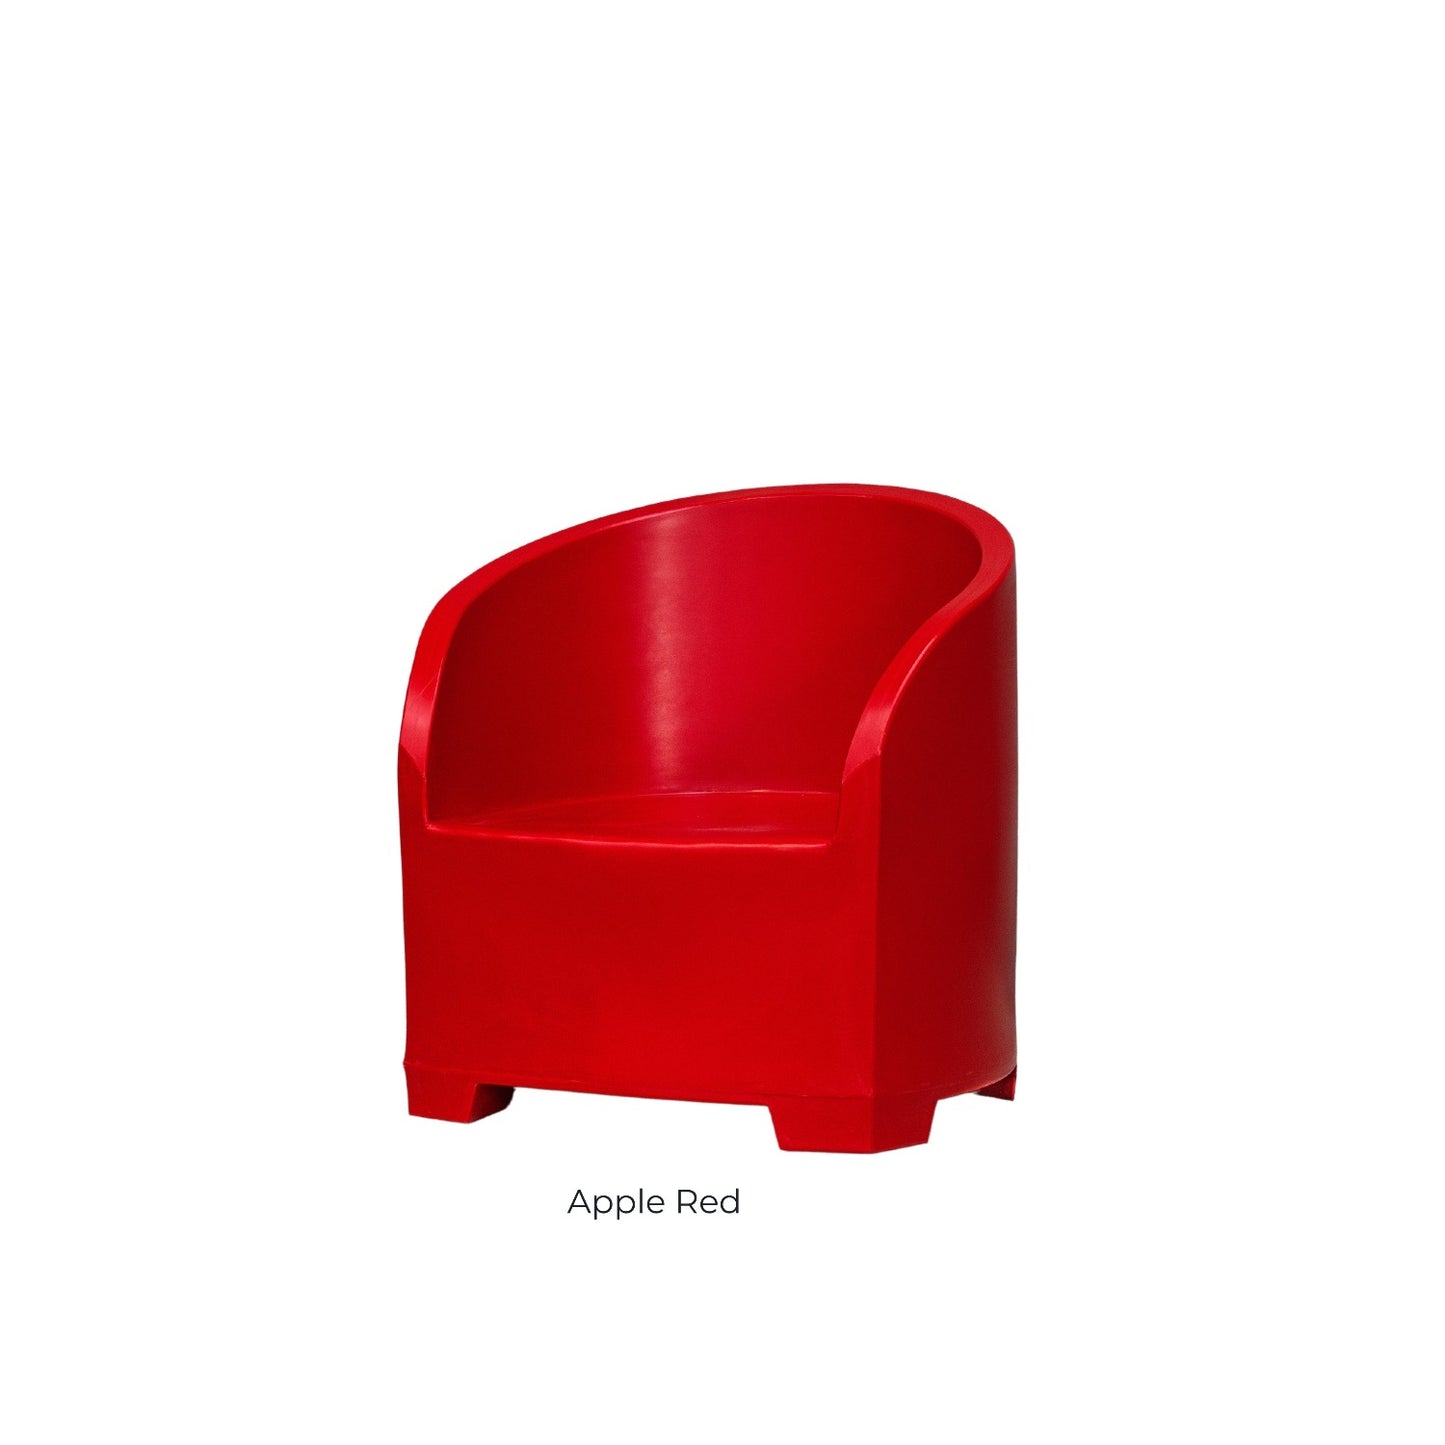 Colourful red outdoor chair by Modscene